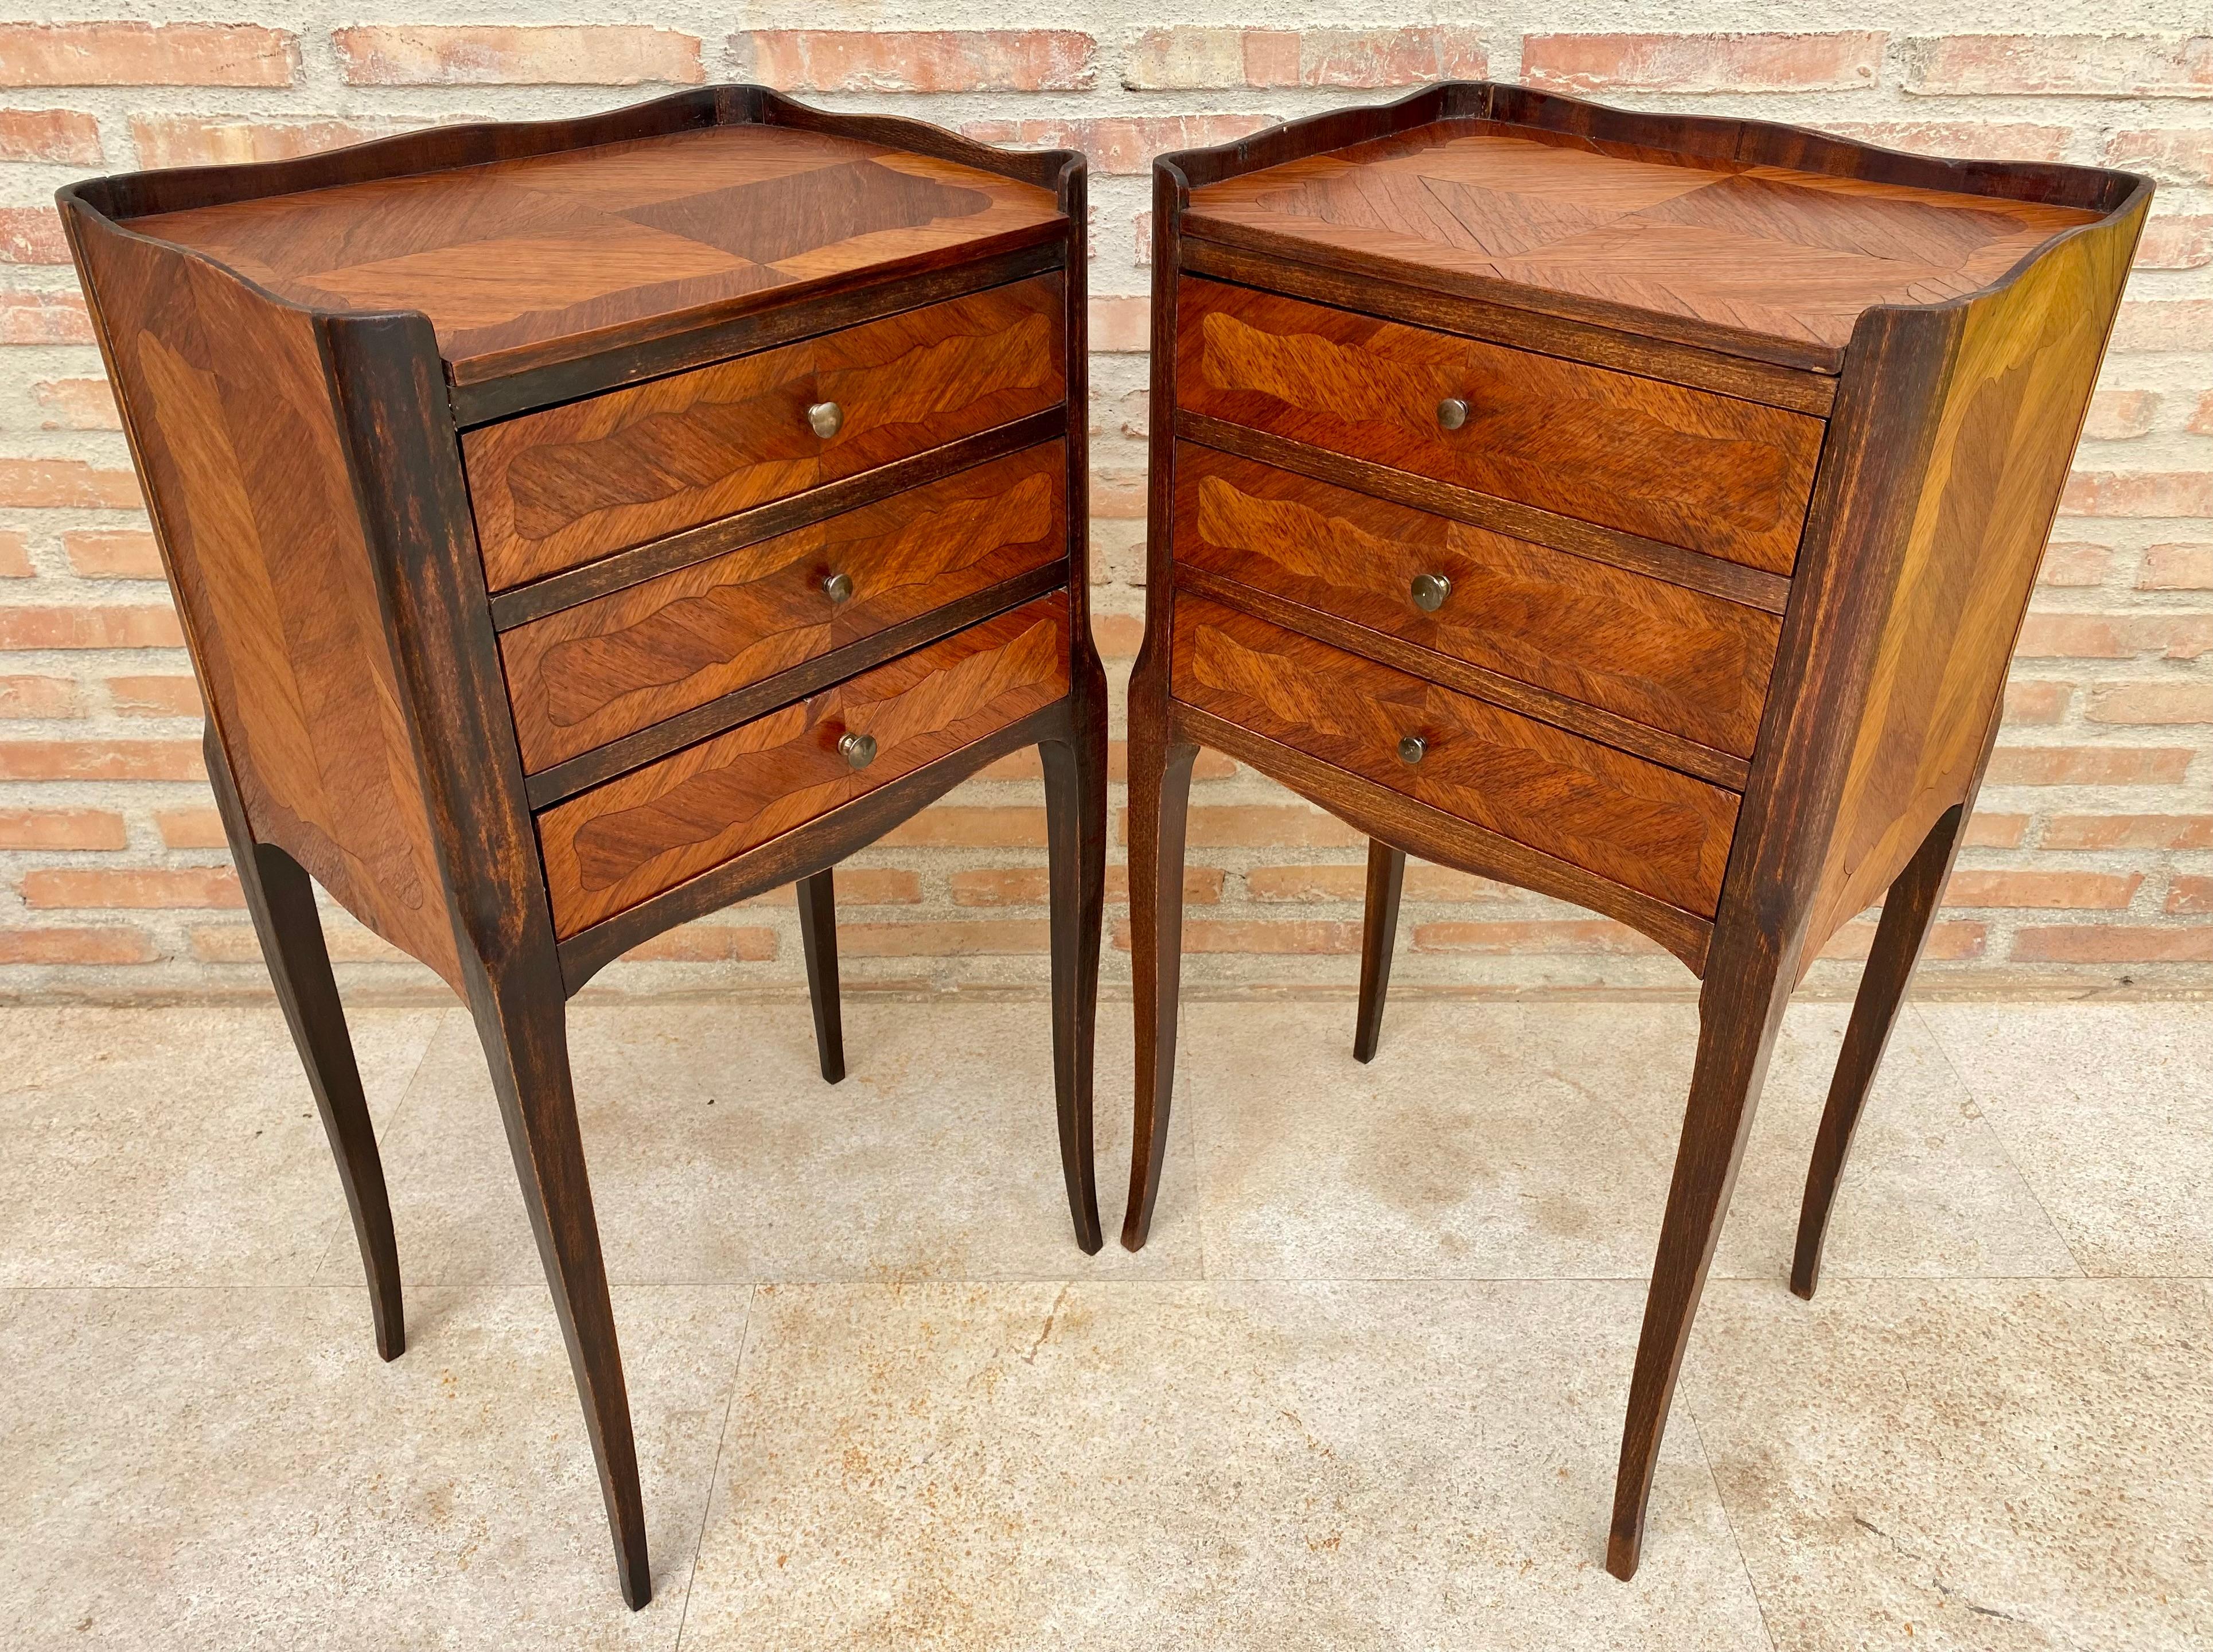 Elegant pair of coffee tables or bedside tables in antique Louis XV style from the 1940s, rare and fine in walnut. This pair of bedside tables has particularly slim legs. In the front they have a comfortable drawer and an open shelf. Pair of really